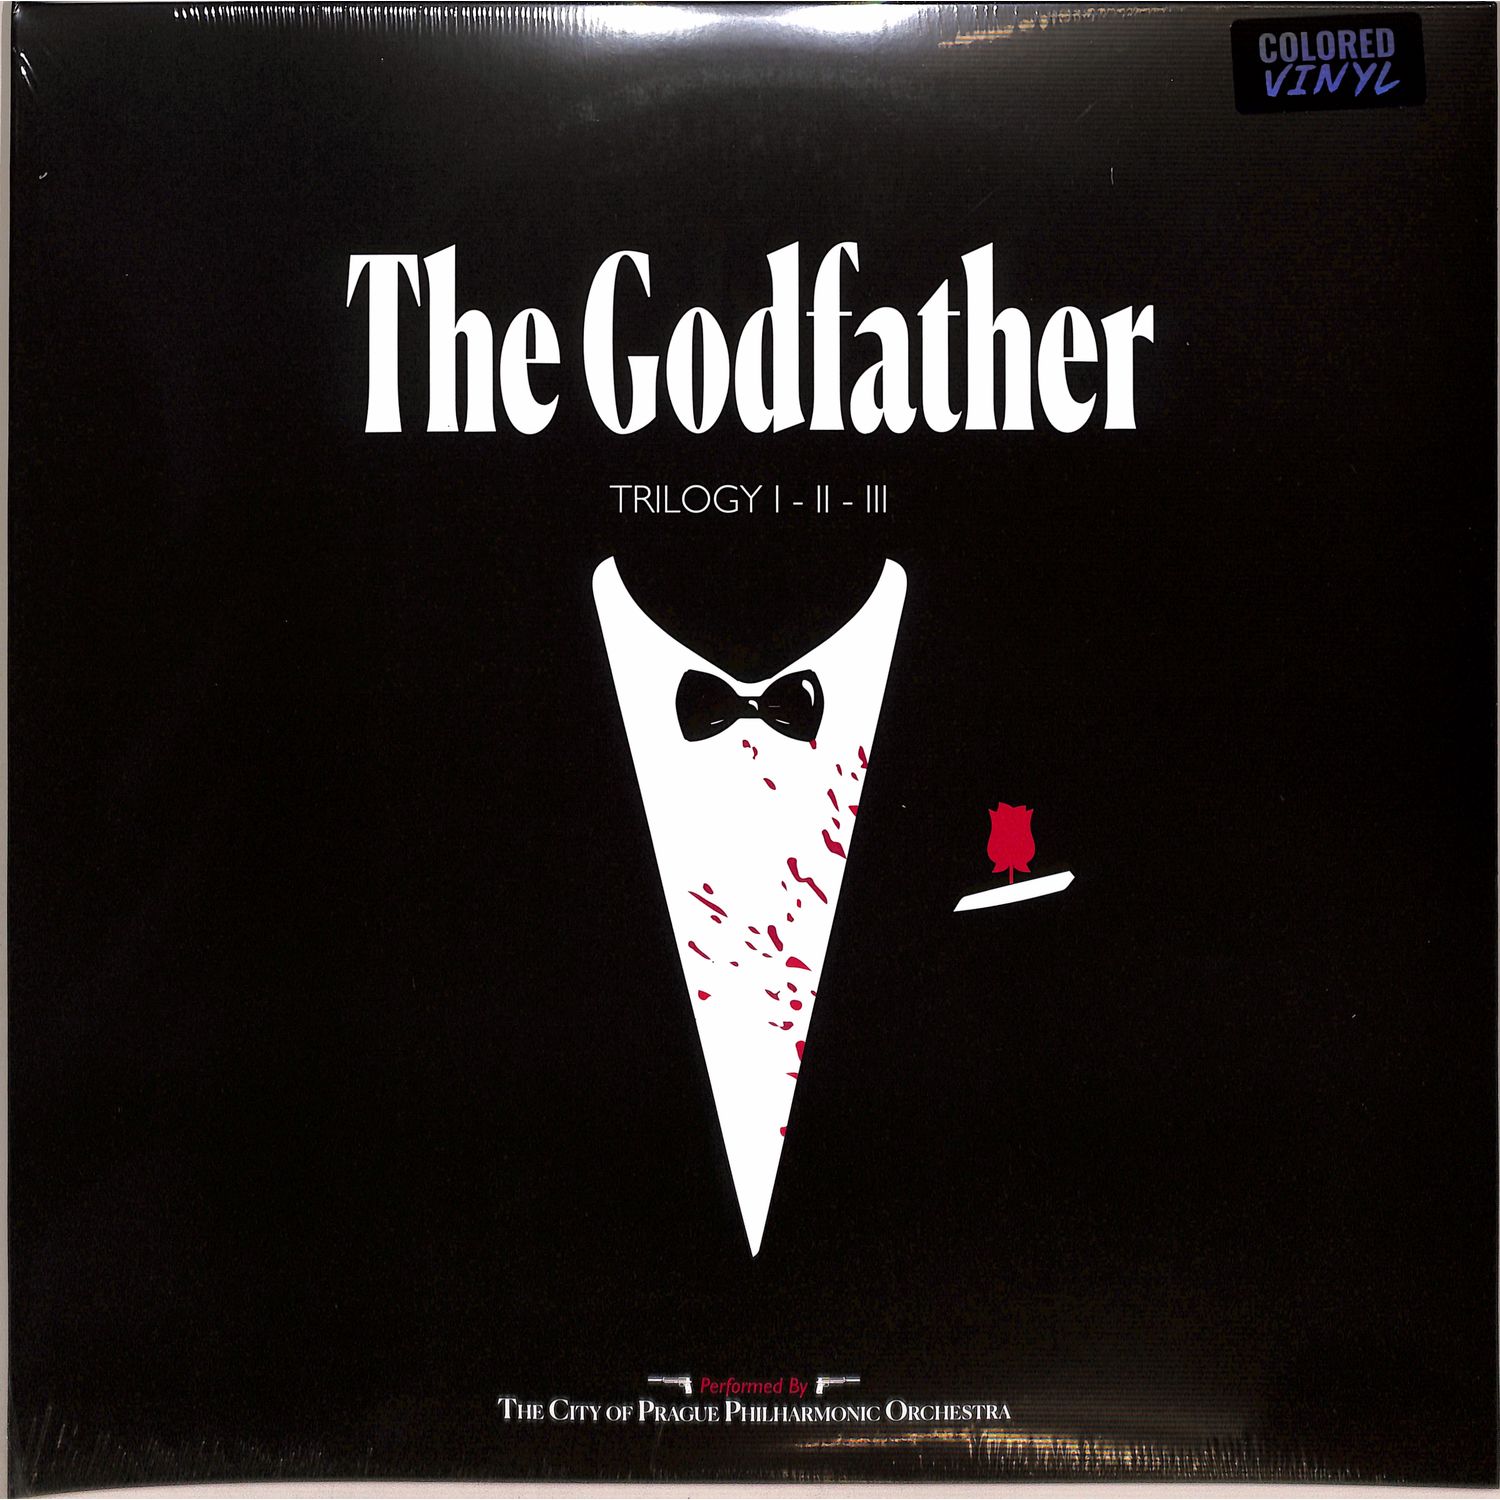 The City Of Prague Philharmonic Orchestra - THE GODFATHER TRILOGY 